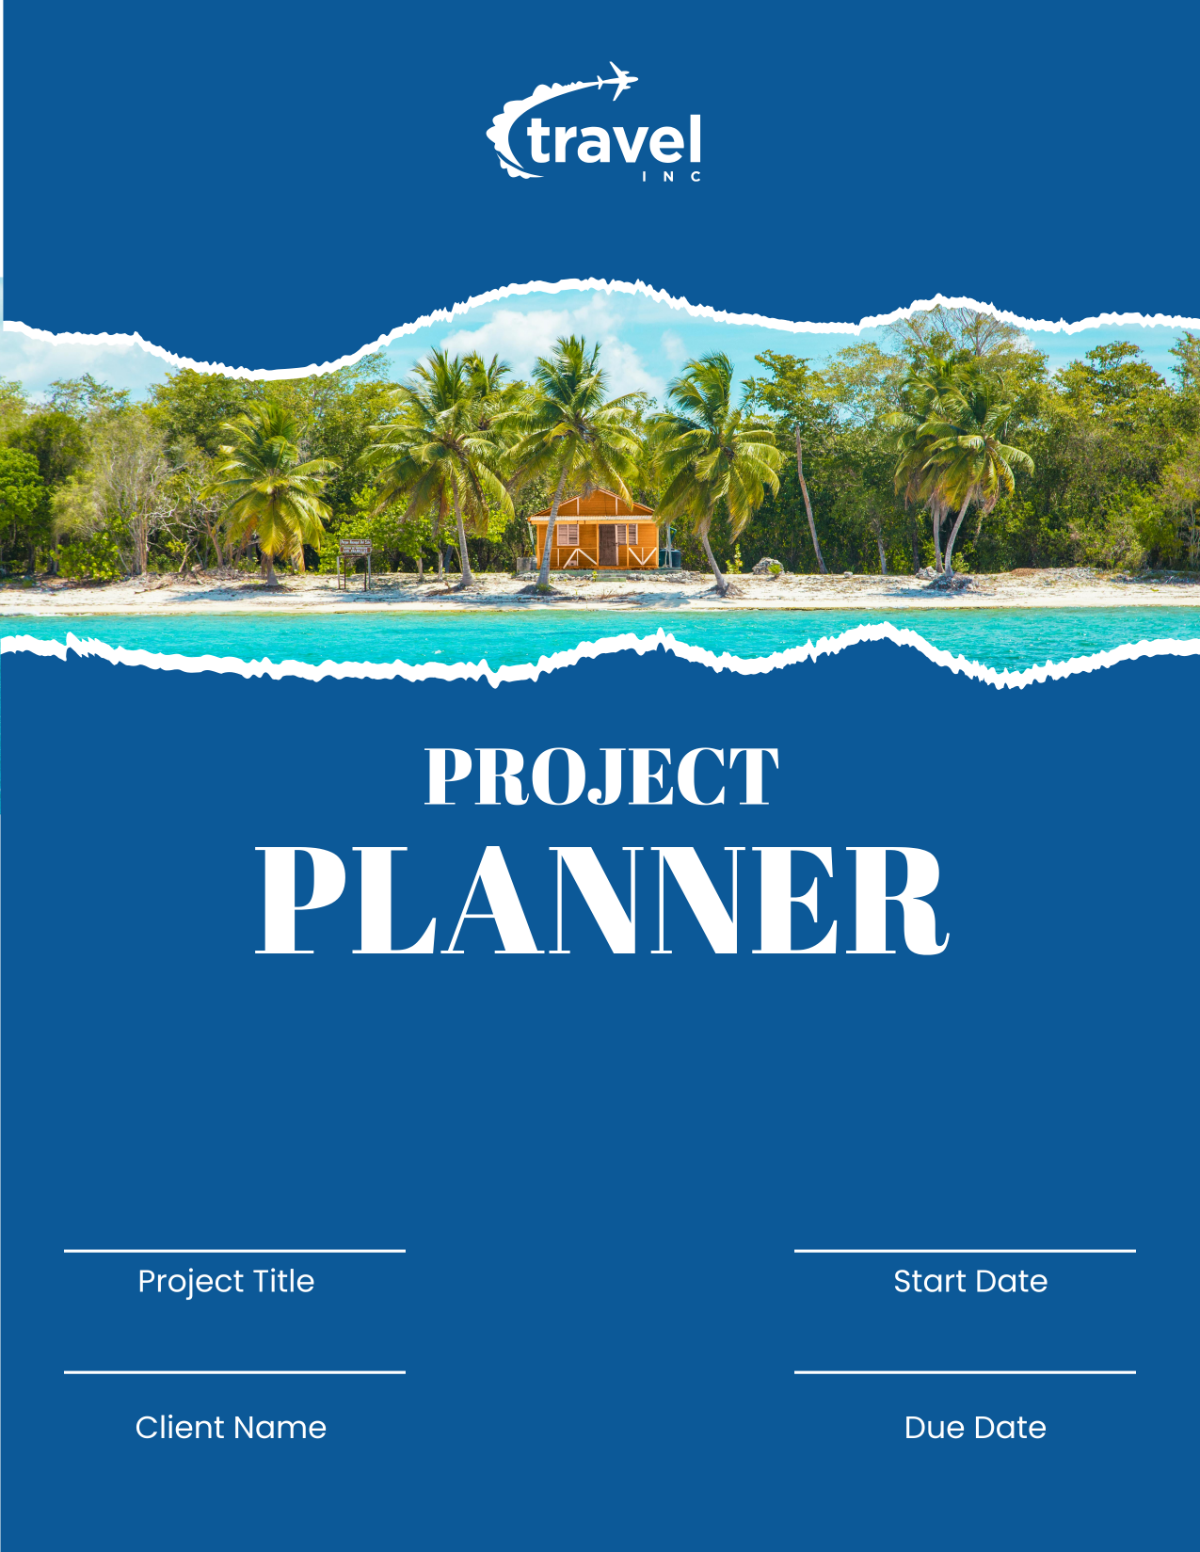 Travel Agency Project Planner Template